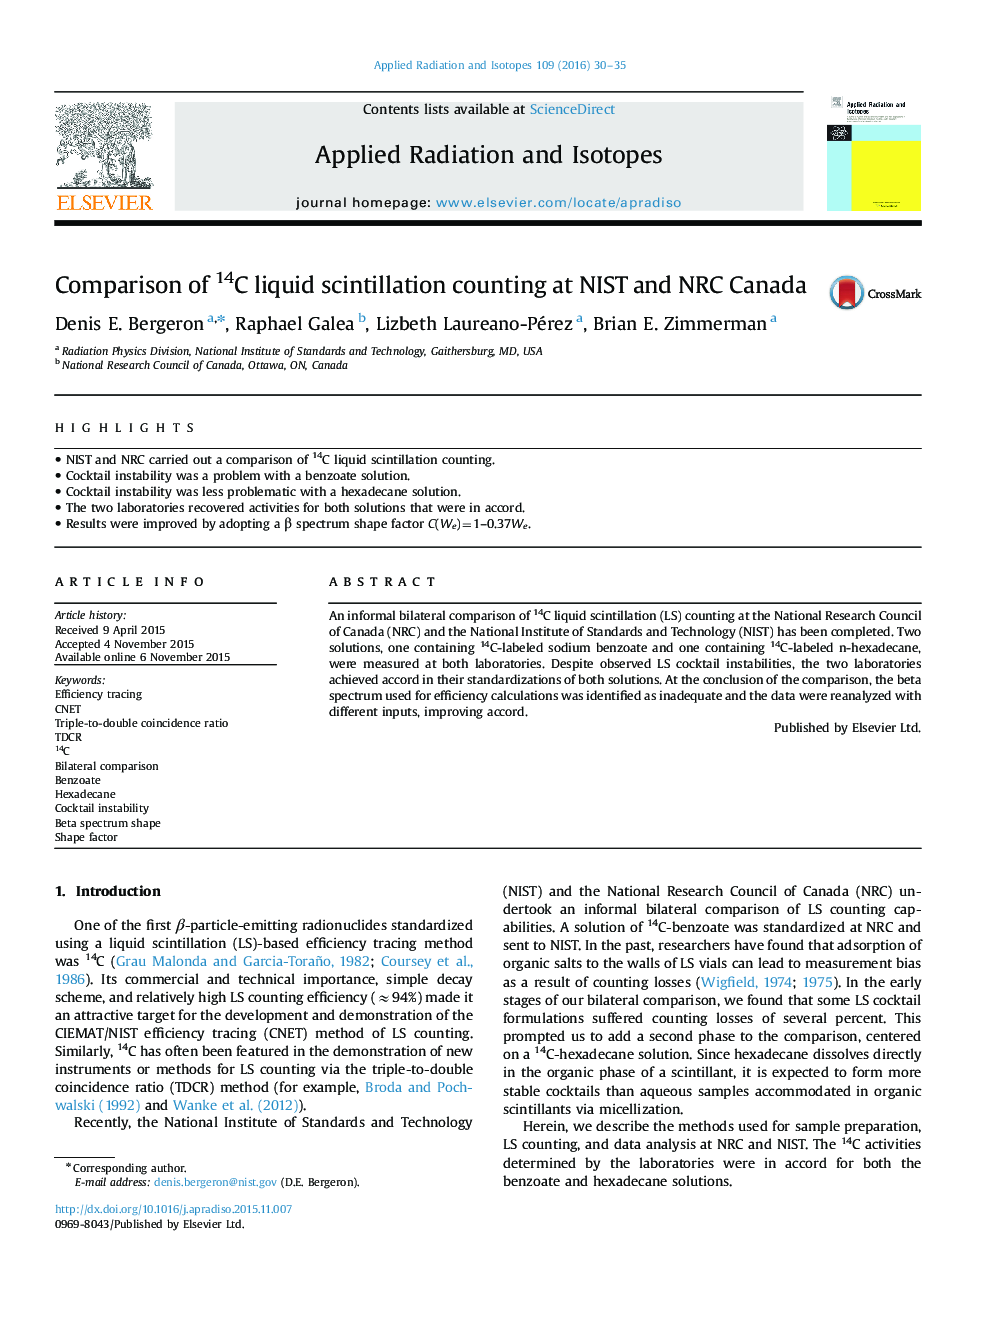 Comparison of 14C liquid scintillation counting at NIST and NRC Canada